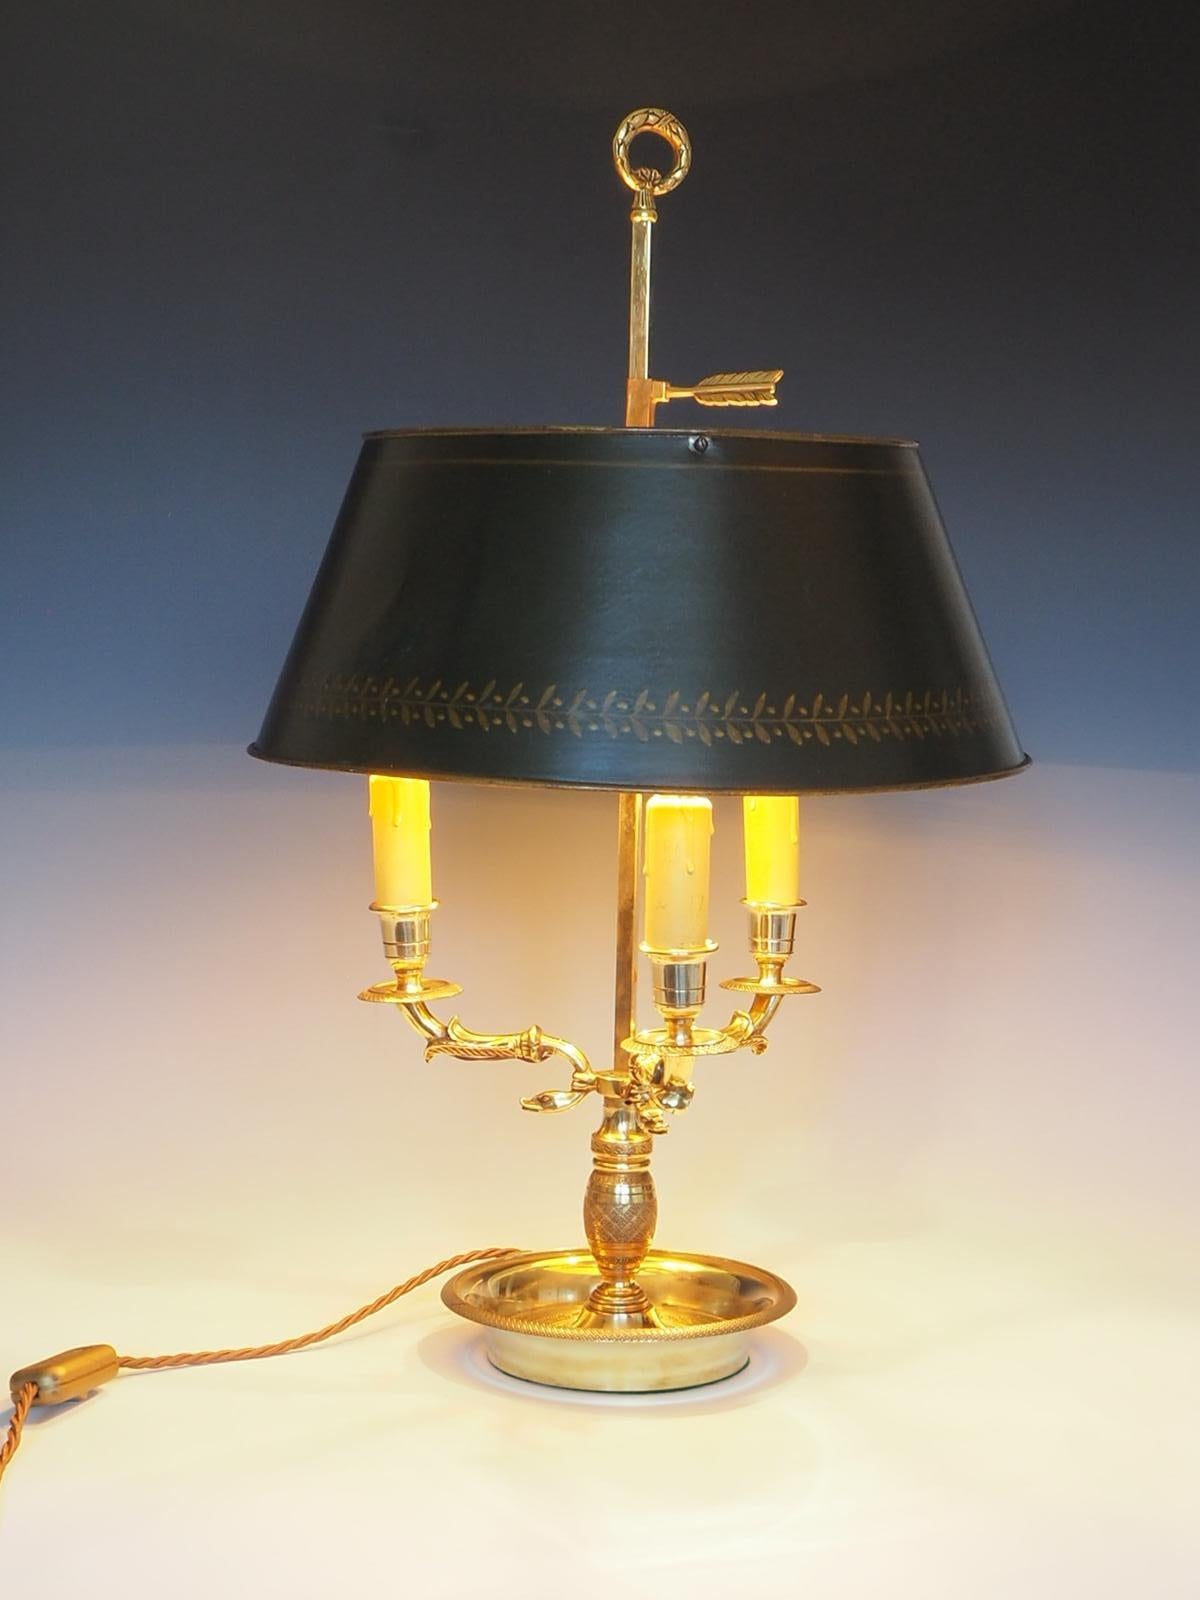 Antique French Bouillotte Table Lamp from the 19th Century is a stunning piece crafted from brass, featuring a serpent scrolled three armed base and an adjustable green shade.

The lamp exudes elegance and sophistication, making it a perfect